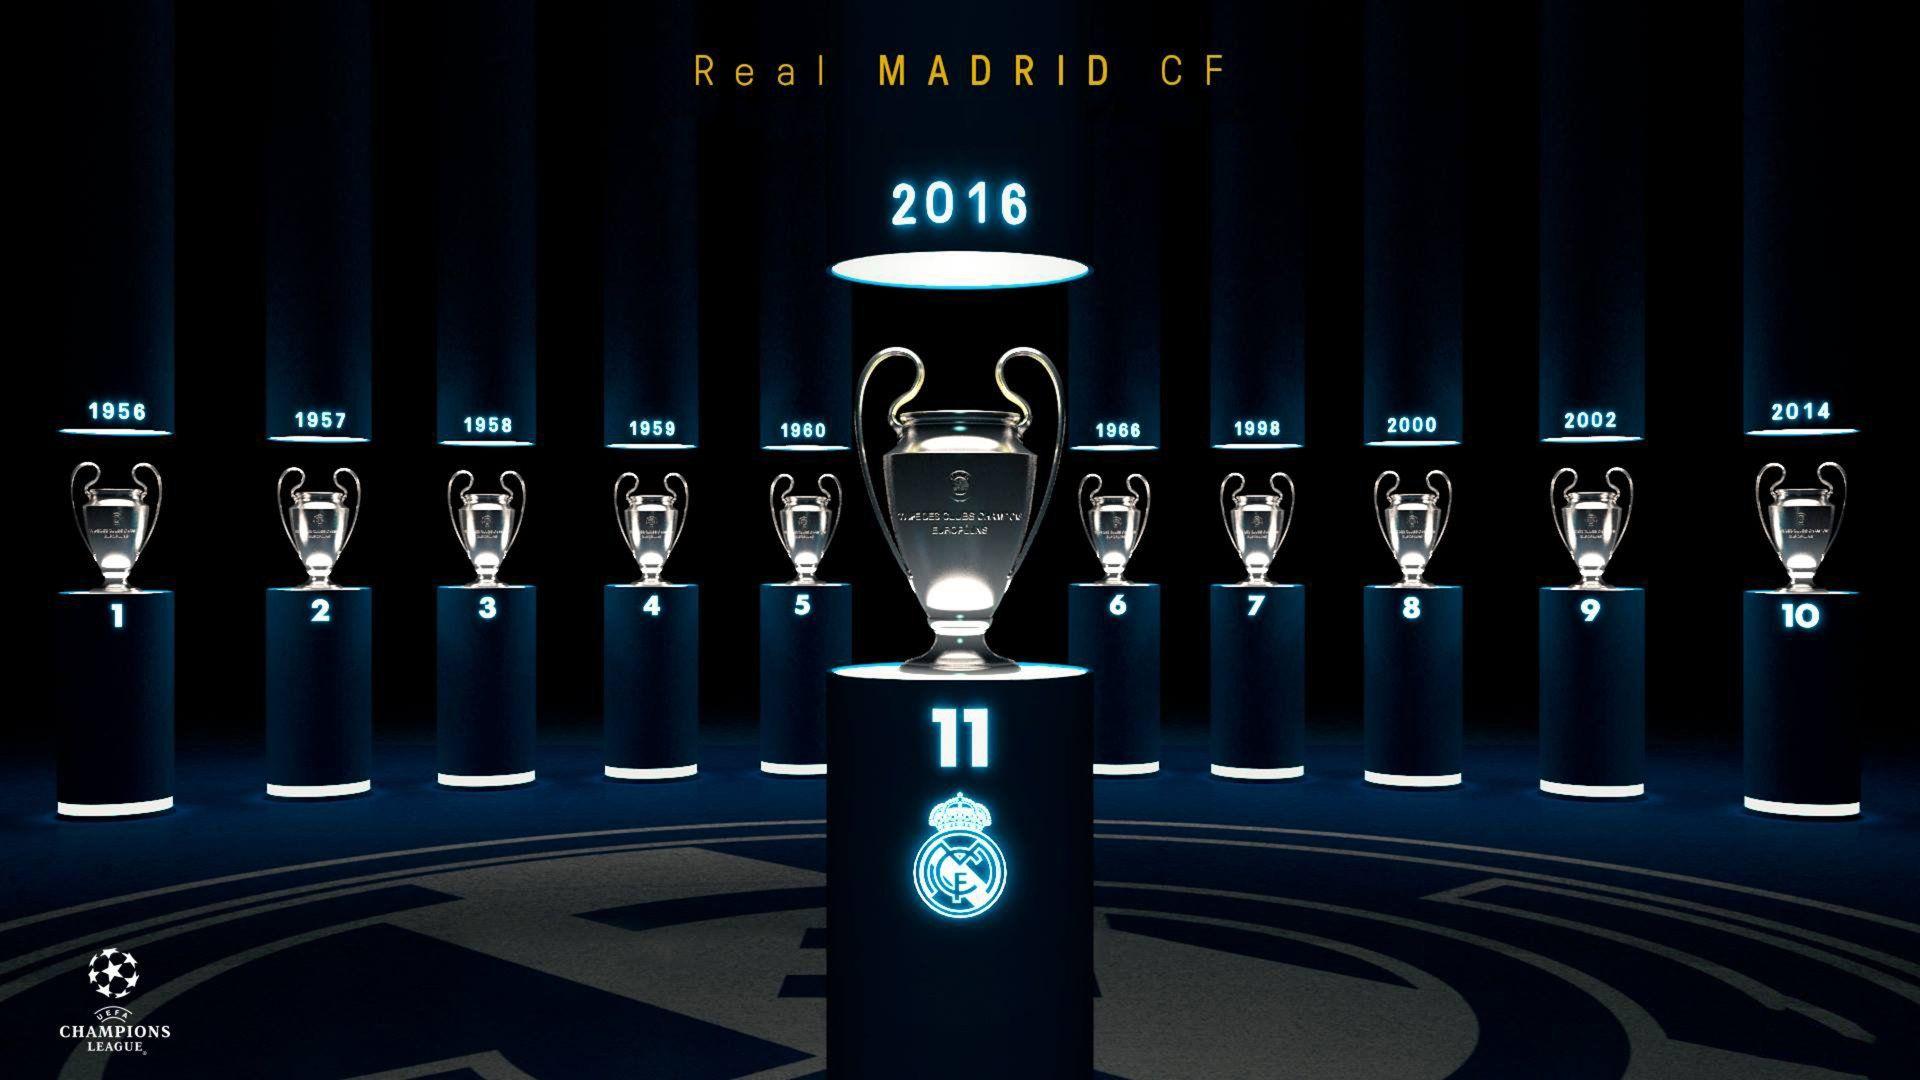 Real Madrid 4K Ultra HD Wallpapers - Top Free Real Madrid 4K Ultra HD ...